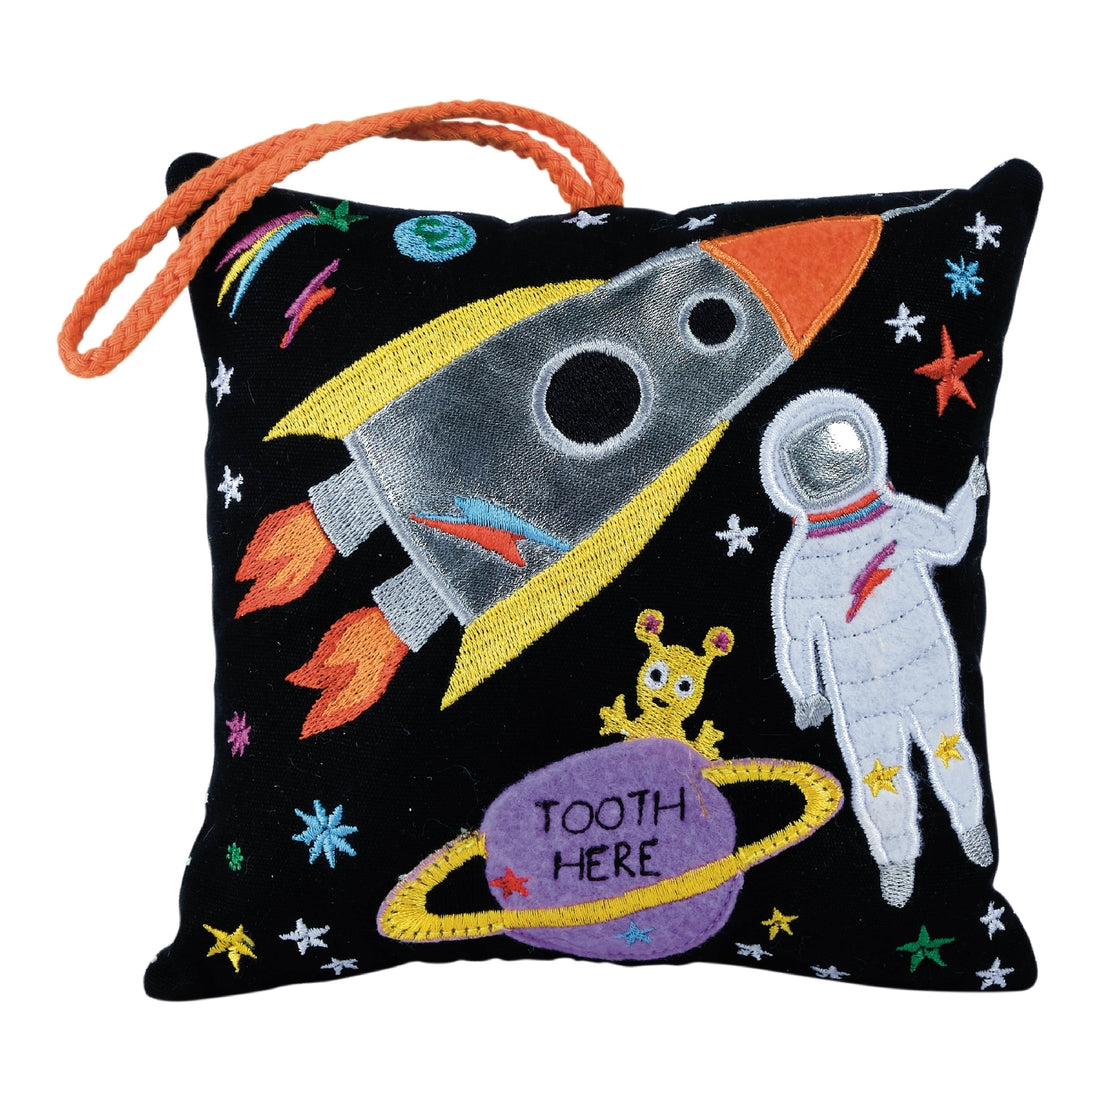 Space Tooth Fairy Pillow